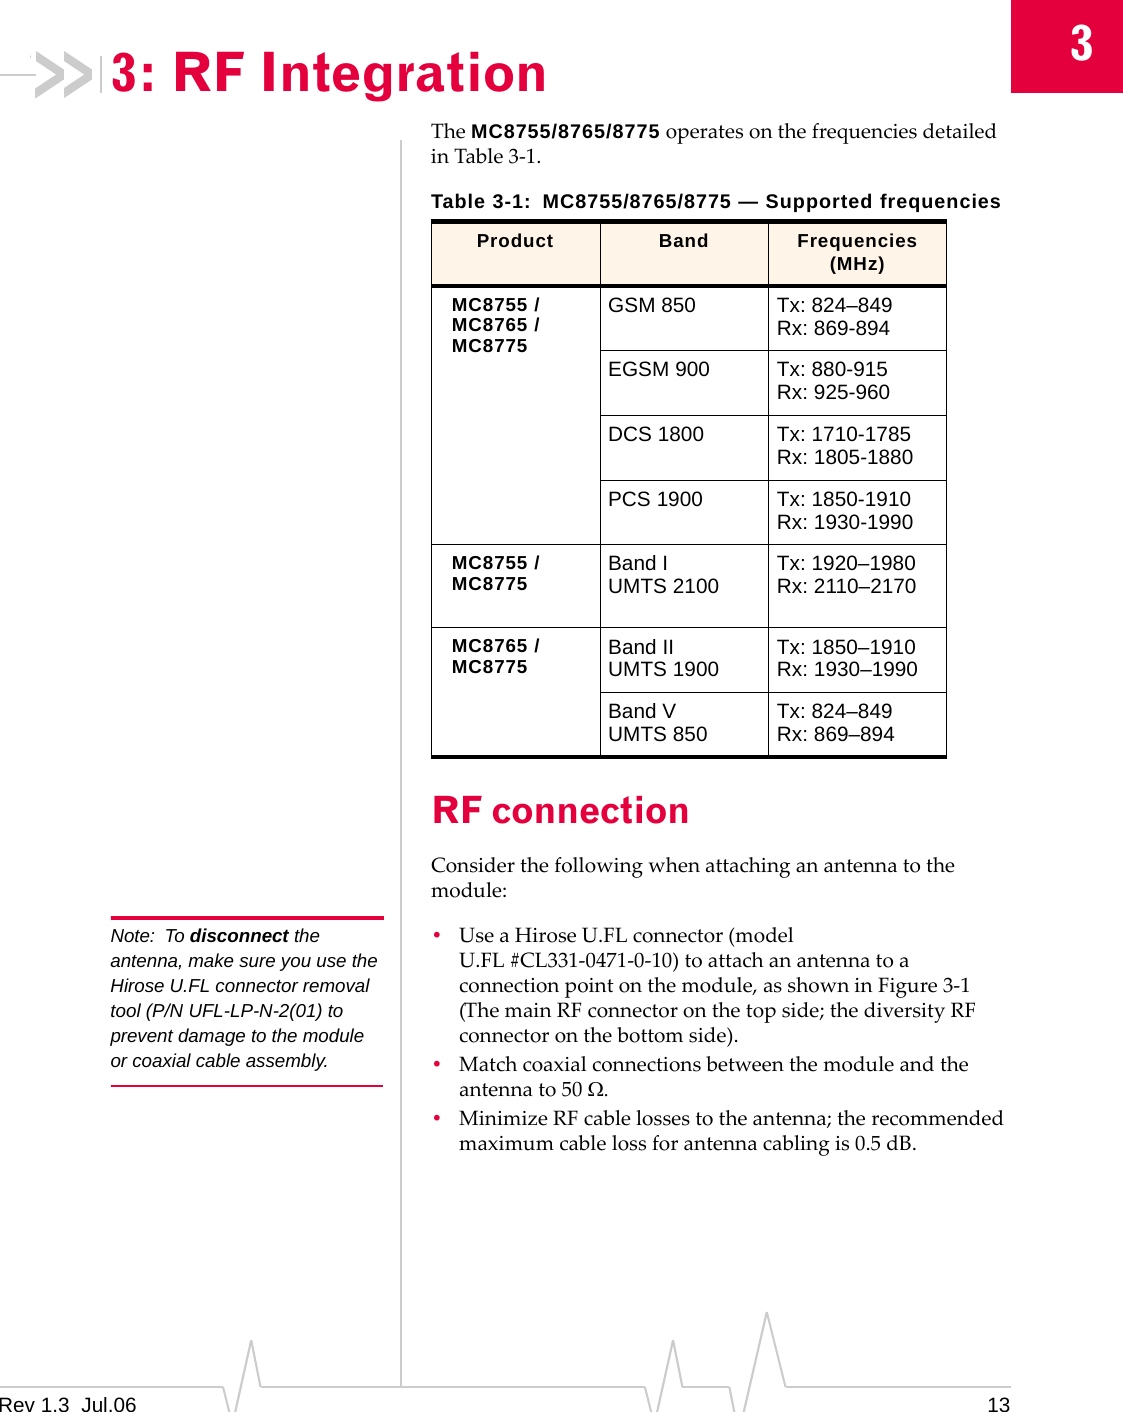 3Rev 1.3  Jul.06 133: RF IntegrationTheMC8755/8765/8775operatesonthefrequenciesdetailedinTable3‐1.RF connectionConsiderthefollowingwhenattachinganantennatothemodule:Note: To disconnect the antenna, make sure you use the Hirose U.FL connector removal tool (P/N UFL-LP-N-2(01) to prevent damage to the module or coaxial cable assembly.•UseaHiroseU.FLconnector(modelU.FL#CL331‐0471‐0‐10)toattachanantennatoaconnectionpointonthemodule,asshowninFigure3‐1(ThemainRFconnectoronthetopside;thediversityRFconnectoronthebottomside).•Matchcoaxialconnectionsbetweenthemoduleandtheantennato50Ω.•MinimizeRFcablelossestotheantenna;therecommendedmaximumcablelossforantennacablingis0.5dB.Table 3-1: MC8755/8765/8775 — Supported frequenciesProduct Band Frequencies (MHz)MC8755 /MC8765 /MC8775GSM 850 Tx: 824–849 Rx: 869-894EGSM 900 Tx: 880-915 Rx: 925-960DCS 1800 Tx: 1710-1785 Rx: 1805-1880PCS 1900 Tx: 1850-1910 Rx: 1930-1990MC8755 /MC8775 Band I UMTS 2100 Tx: 1920–1980 Rx: 2110–2170MC8765 /MC8775 Band II UMTS 1900 Tx: 1850–1910 Rx: 1930–1990Band V UMTS 850 Tx: 824–849 Rx: 869–894